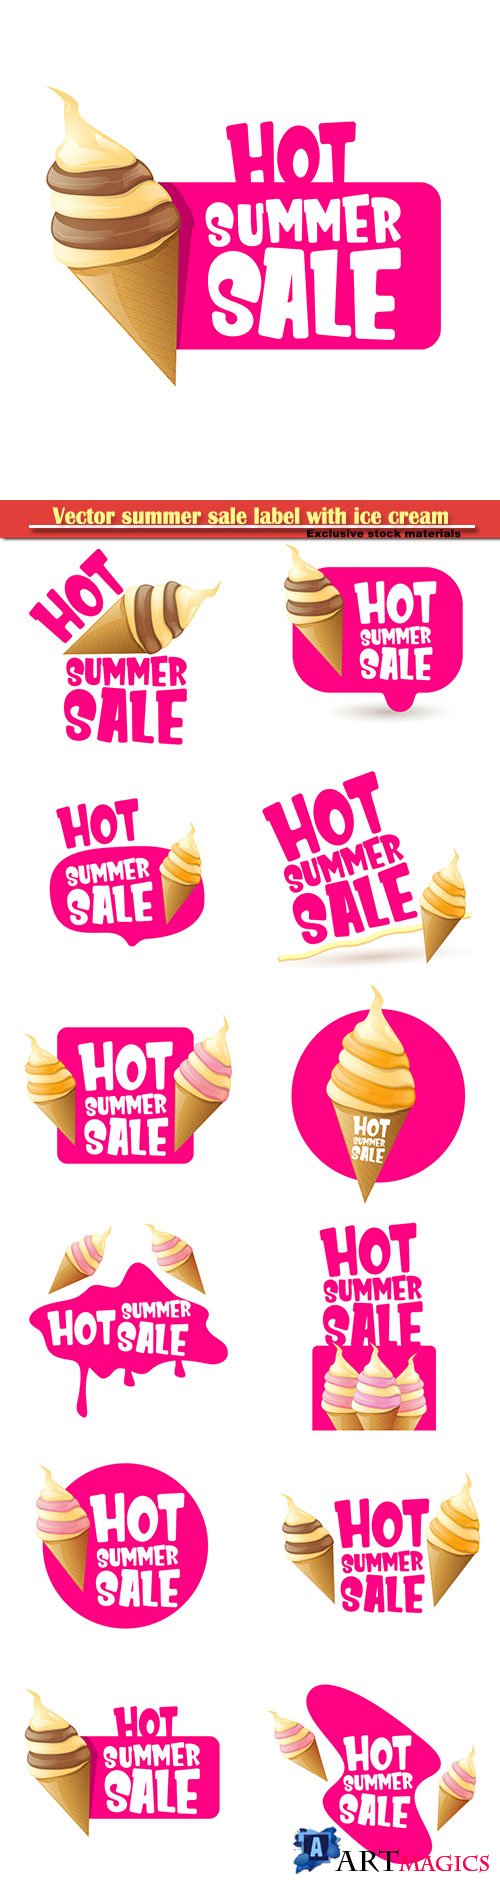 Vector summer sale label with melting ice cream